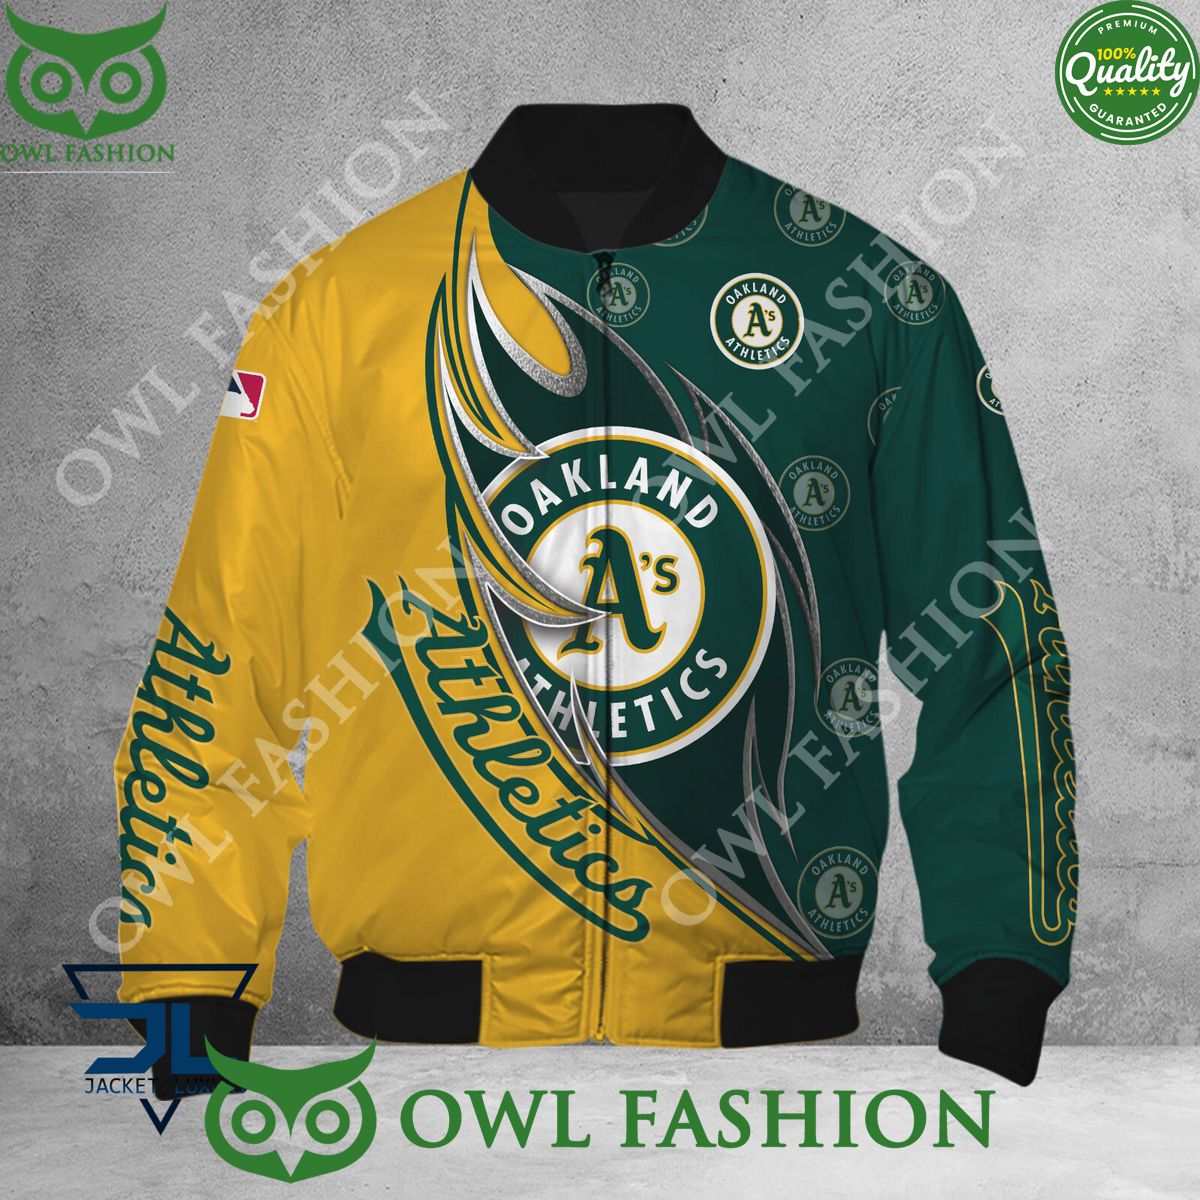 MLB Champion Oakland Athletics Hoodie Shirt Best click of yours